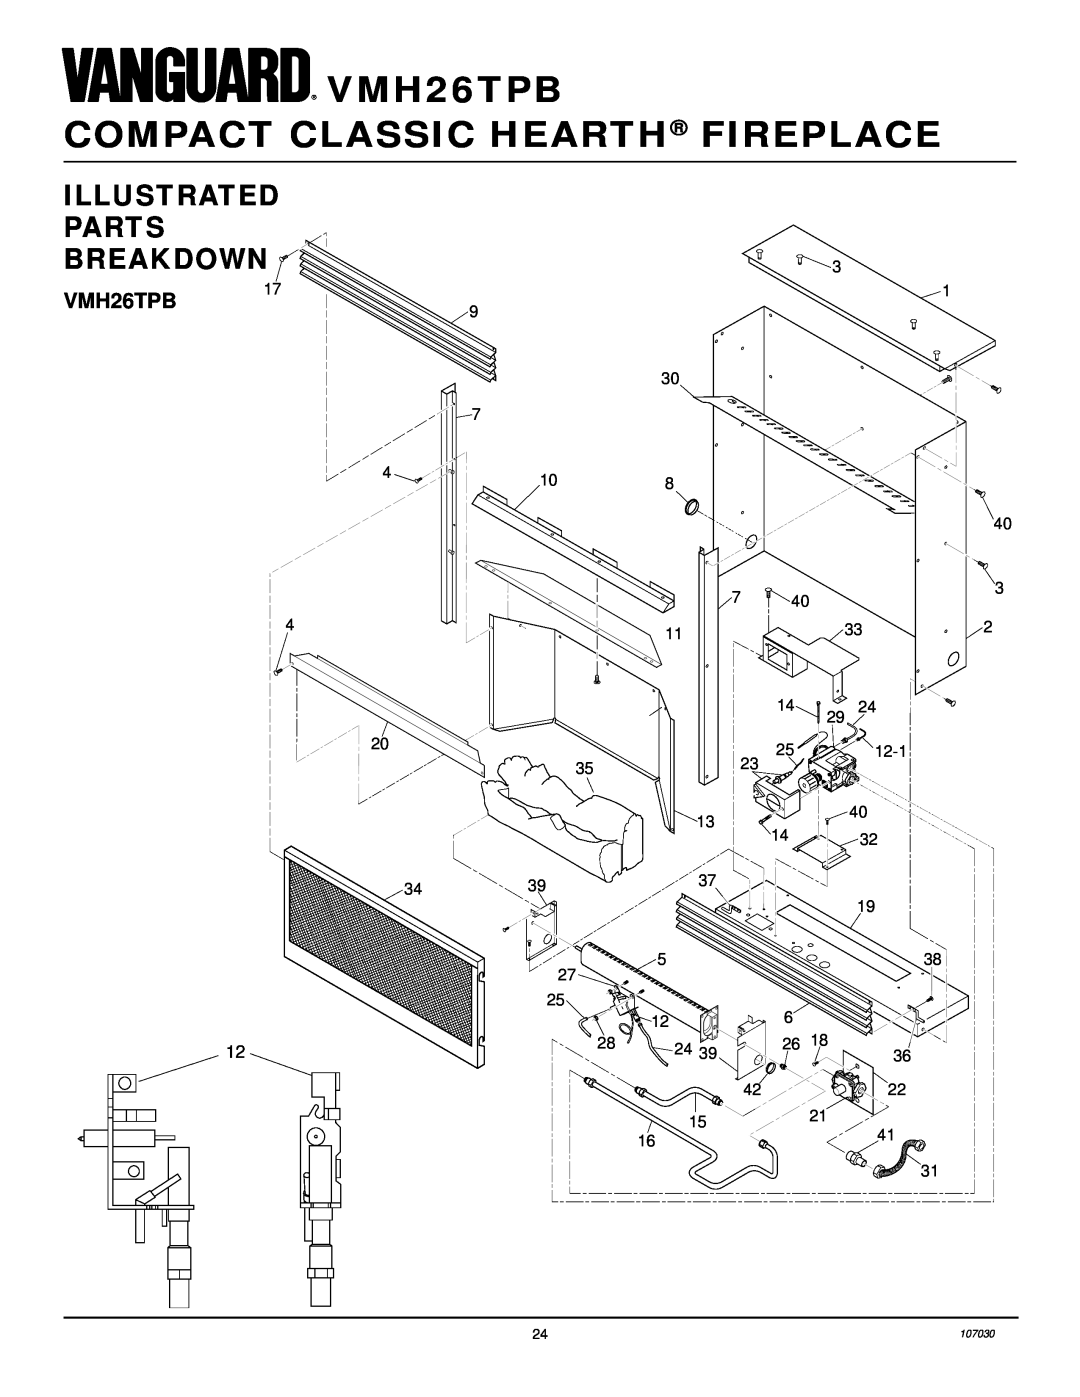 Desa VMH26TPB 14 installation manual Illustrated Parts Breakdown, VMH26TPB COMPACT CLASSIC HEARTH FIREPLACE 